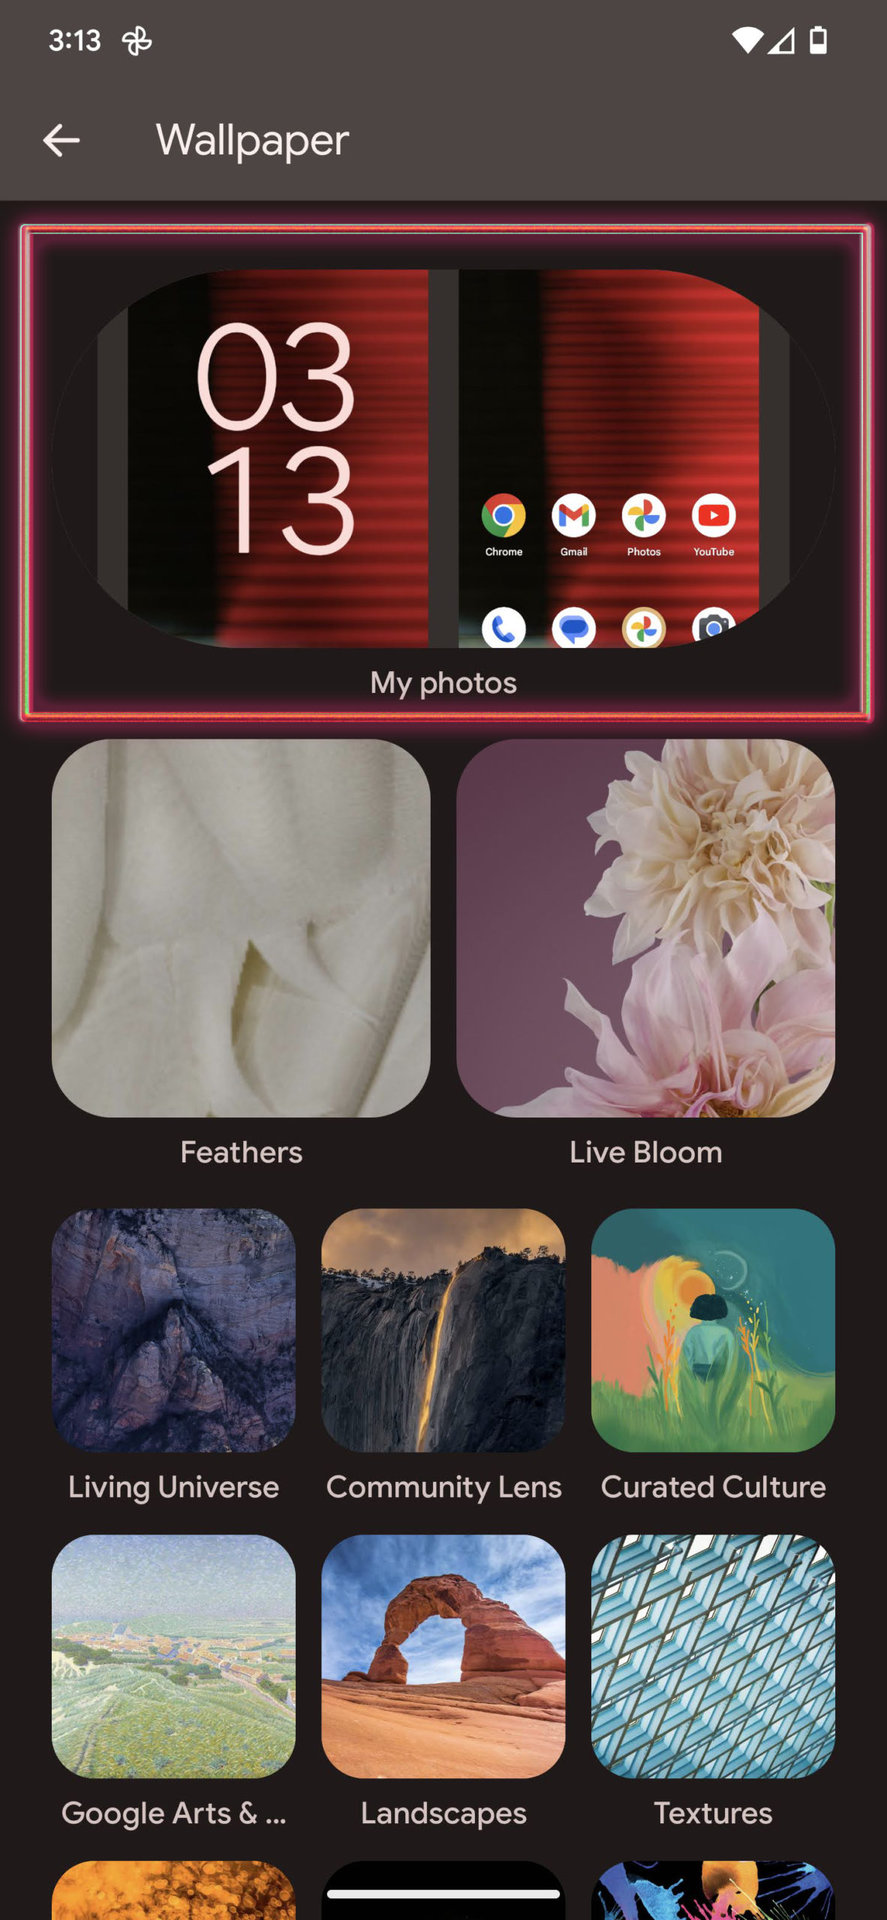 How to change the wallpaper on Android 13 3